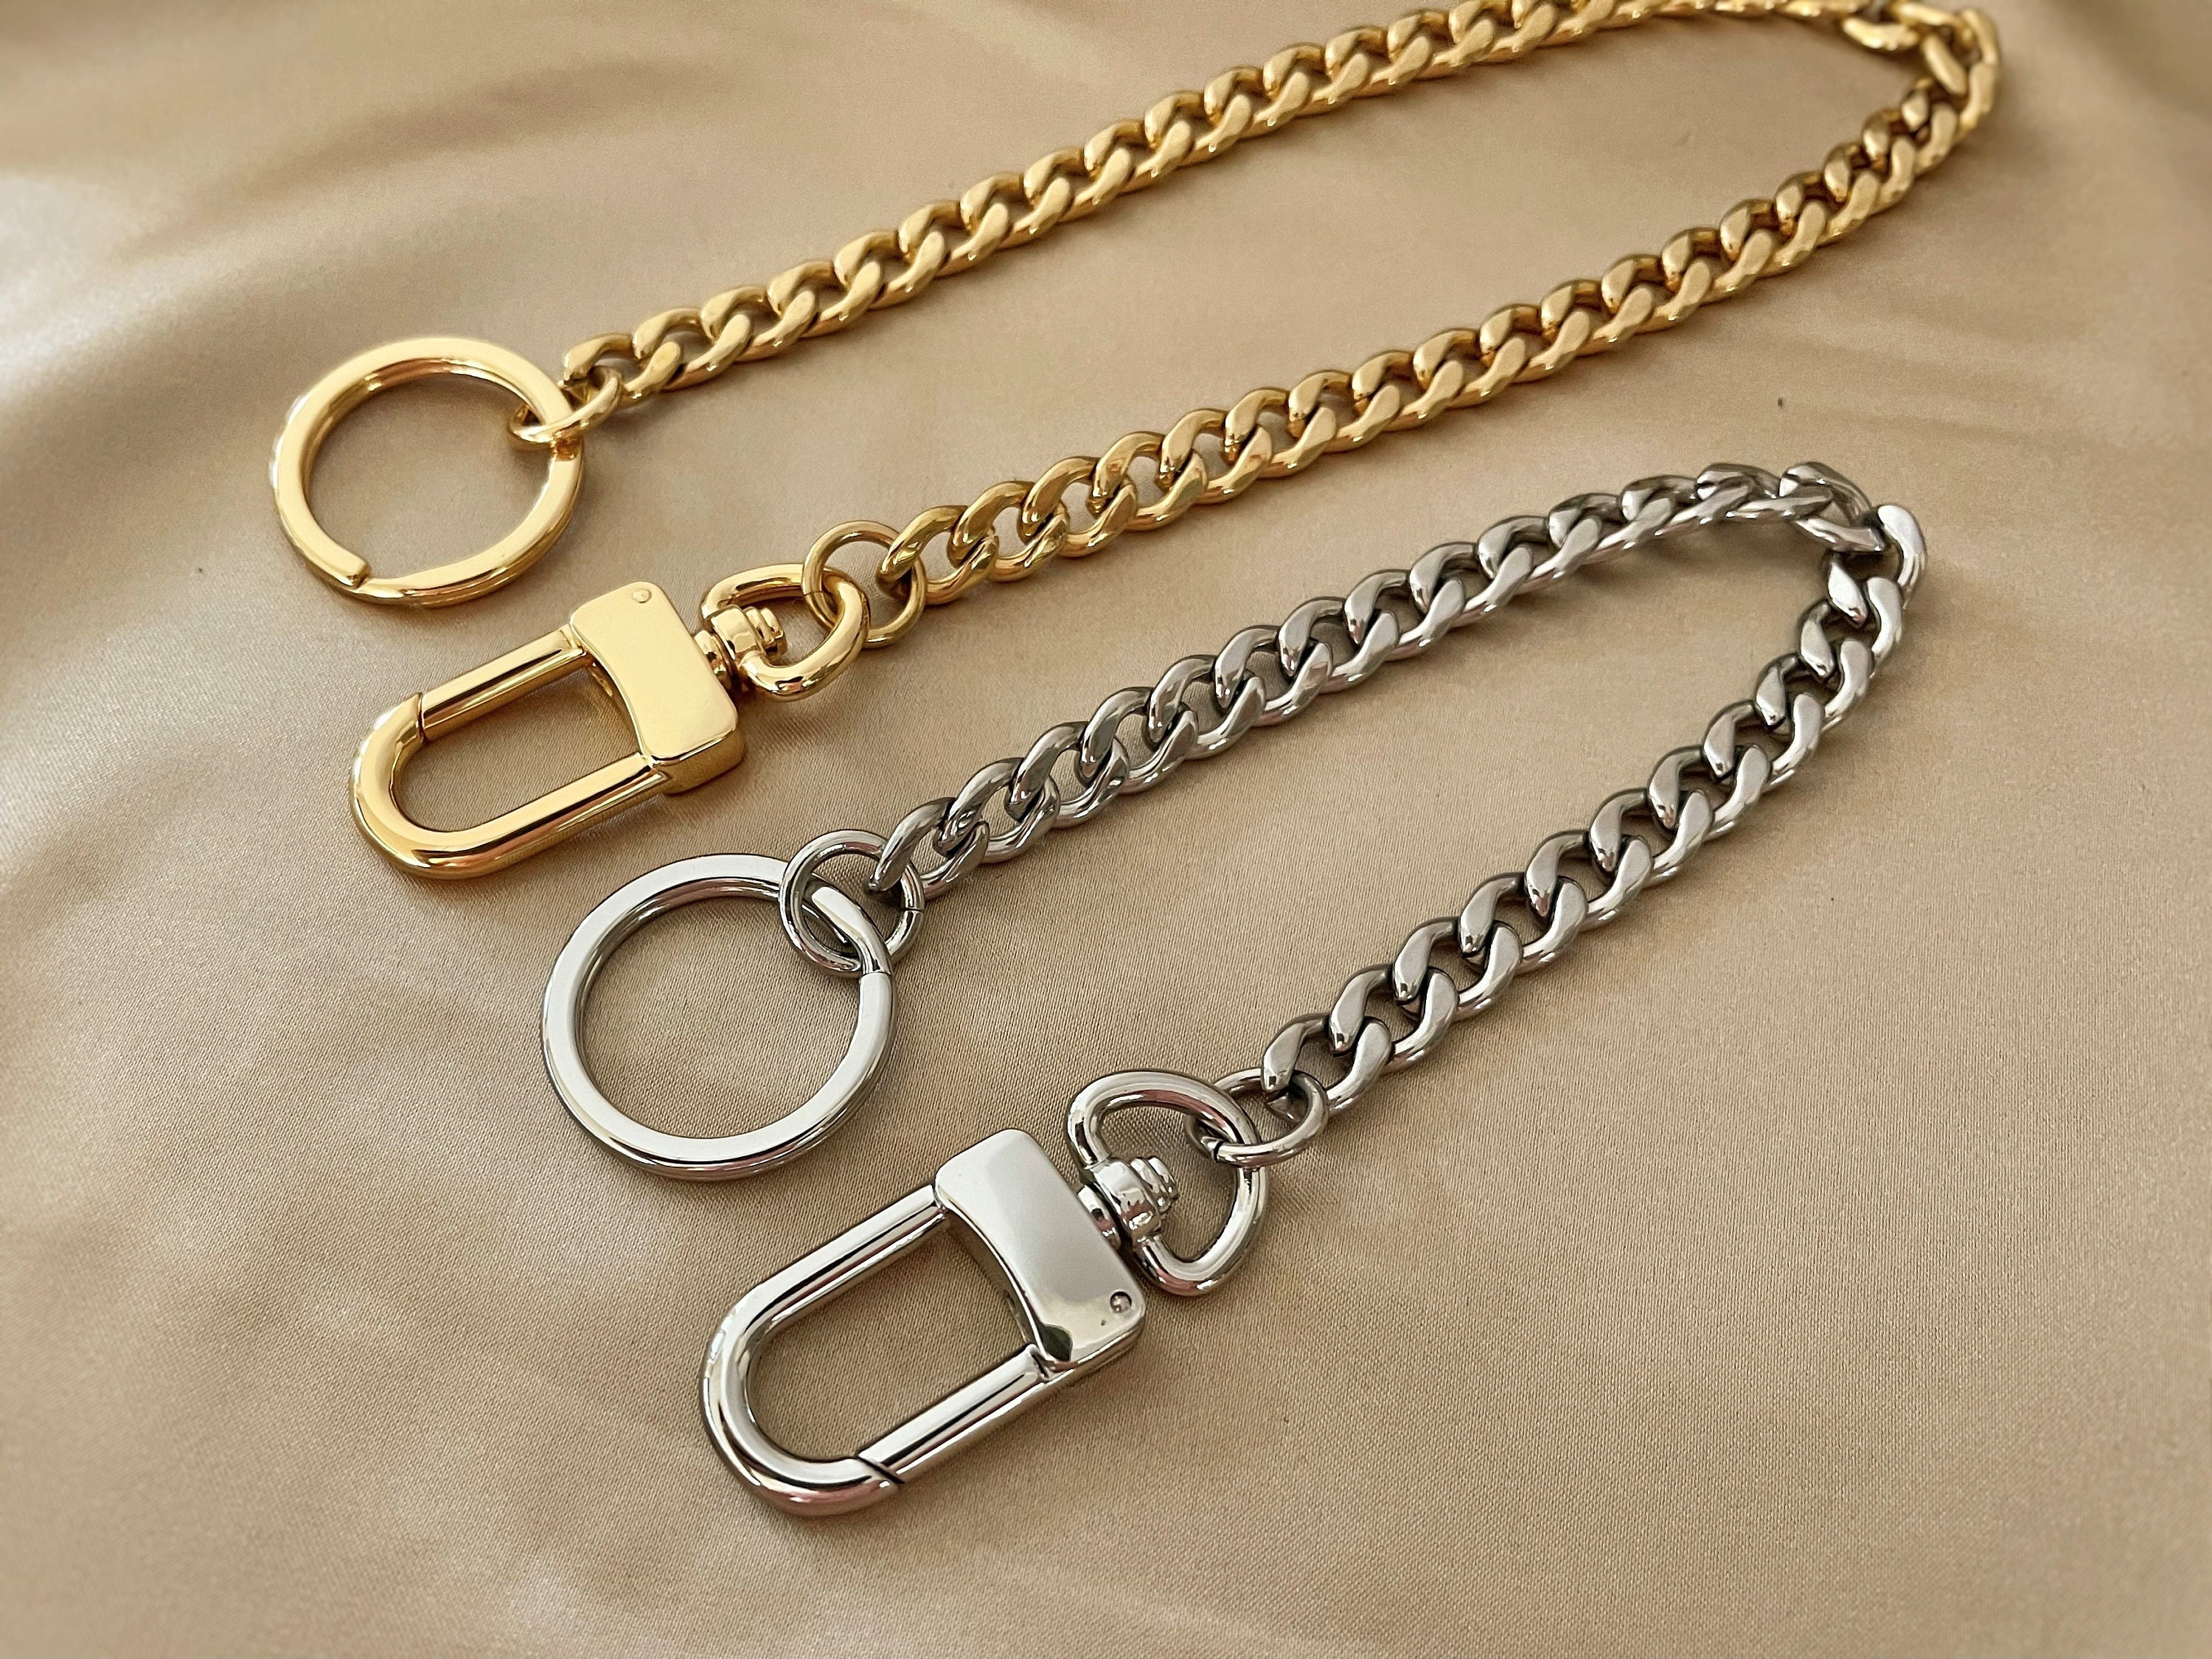 LSLeatherStudio Handbag Keychain, Charm Holding Keyring, Swivel Clasp Keychain with Stainless Steel 9mm NK Curb Chain, Chain Keyring for Purse Silver, Gold